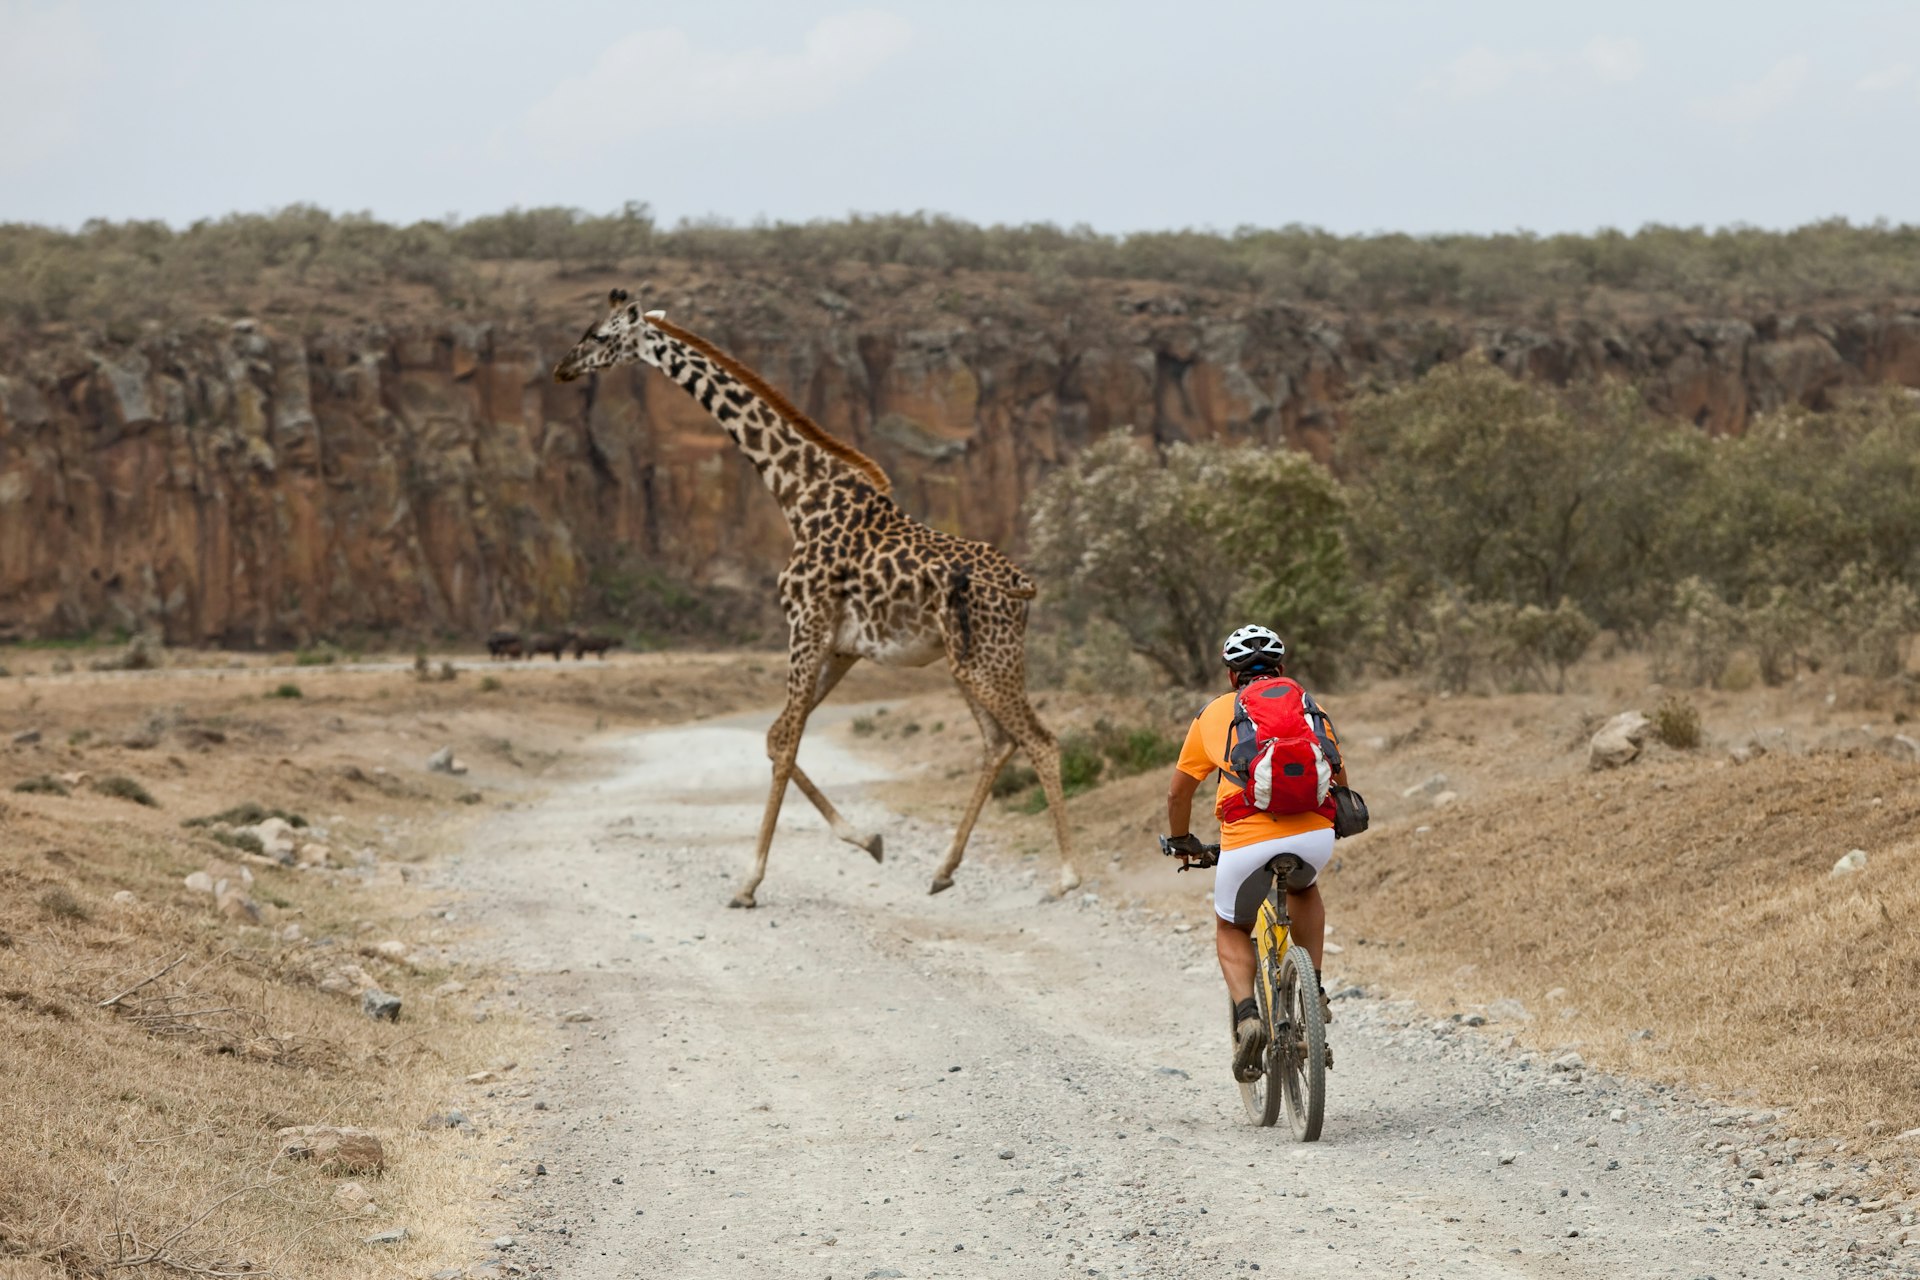 A giraffe crossing in the way of a mountain biker at Hell's Gate National Park in Kenya